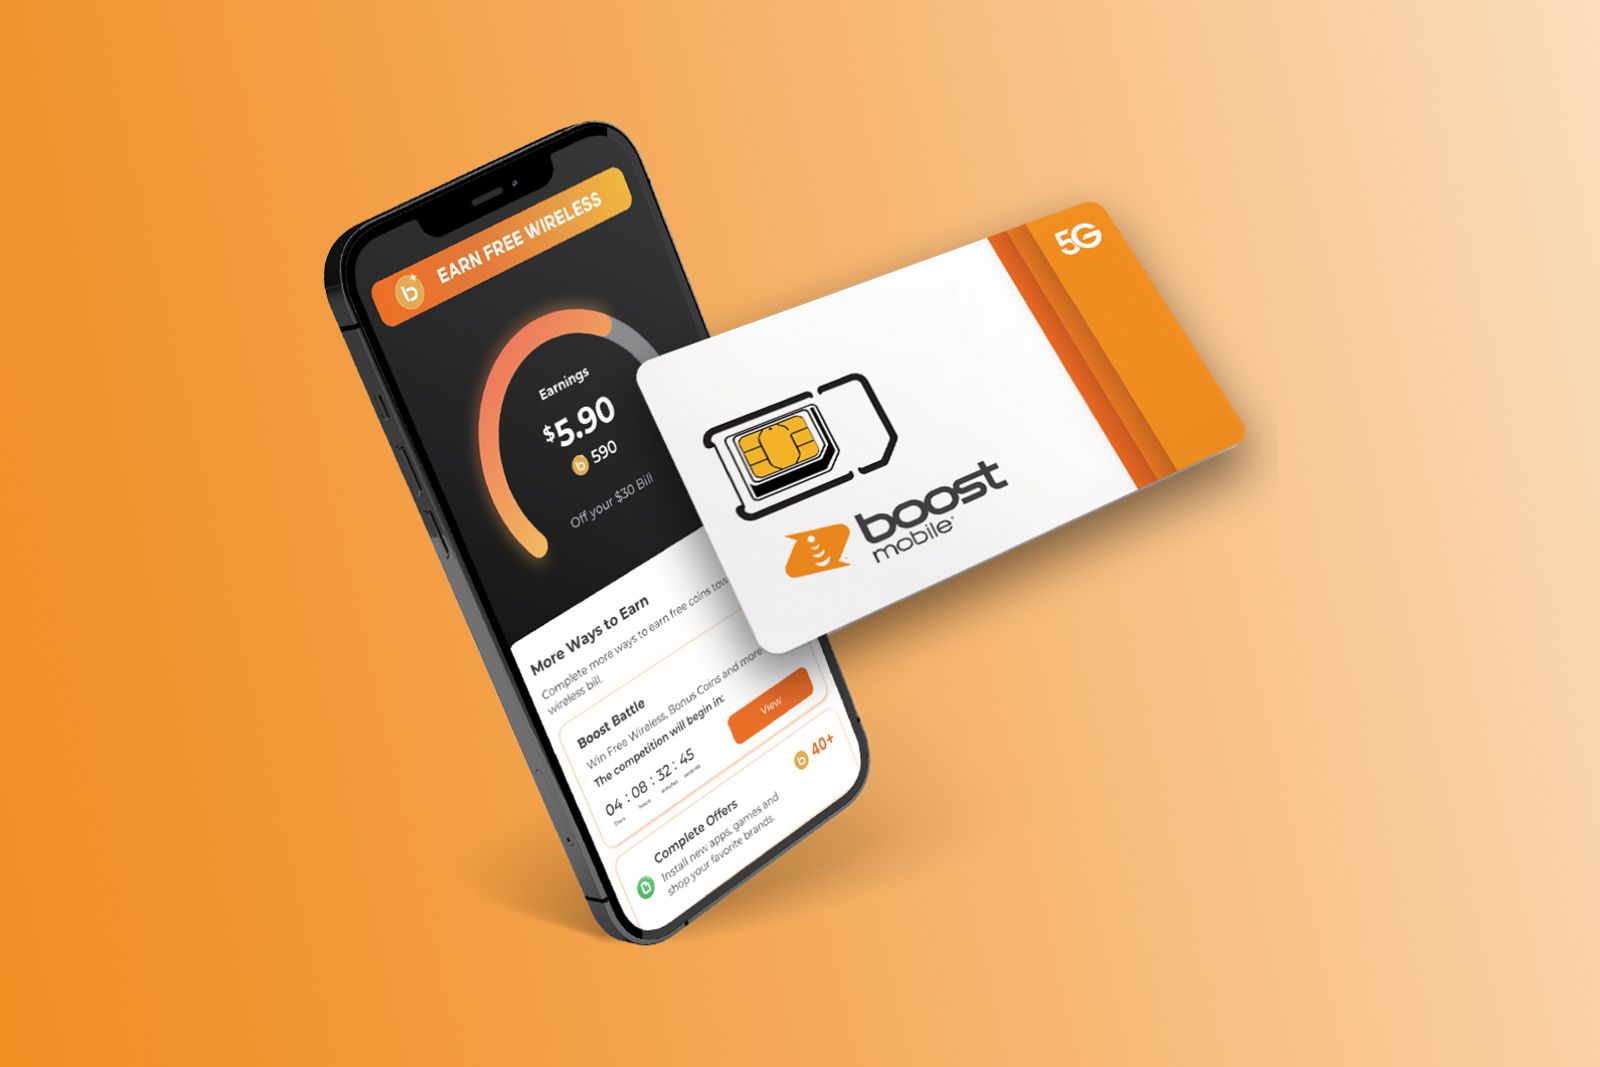 Claim amazing discount offers on 5G/4G LTE data with Boost Mobile photo 1